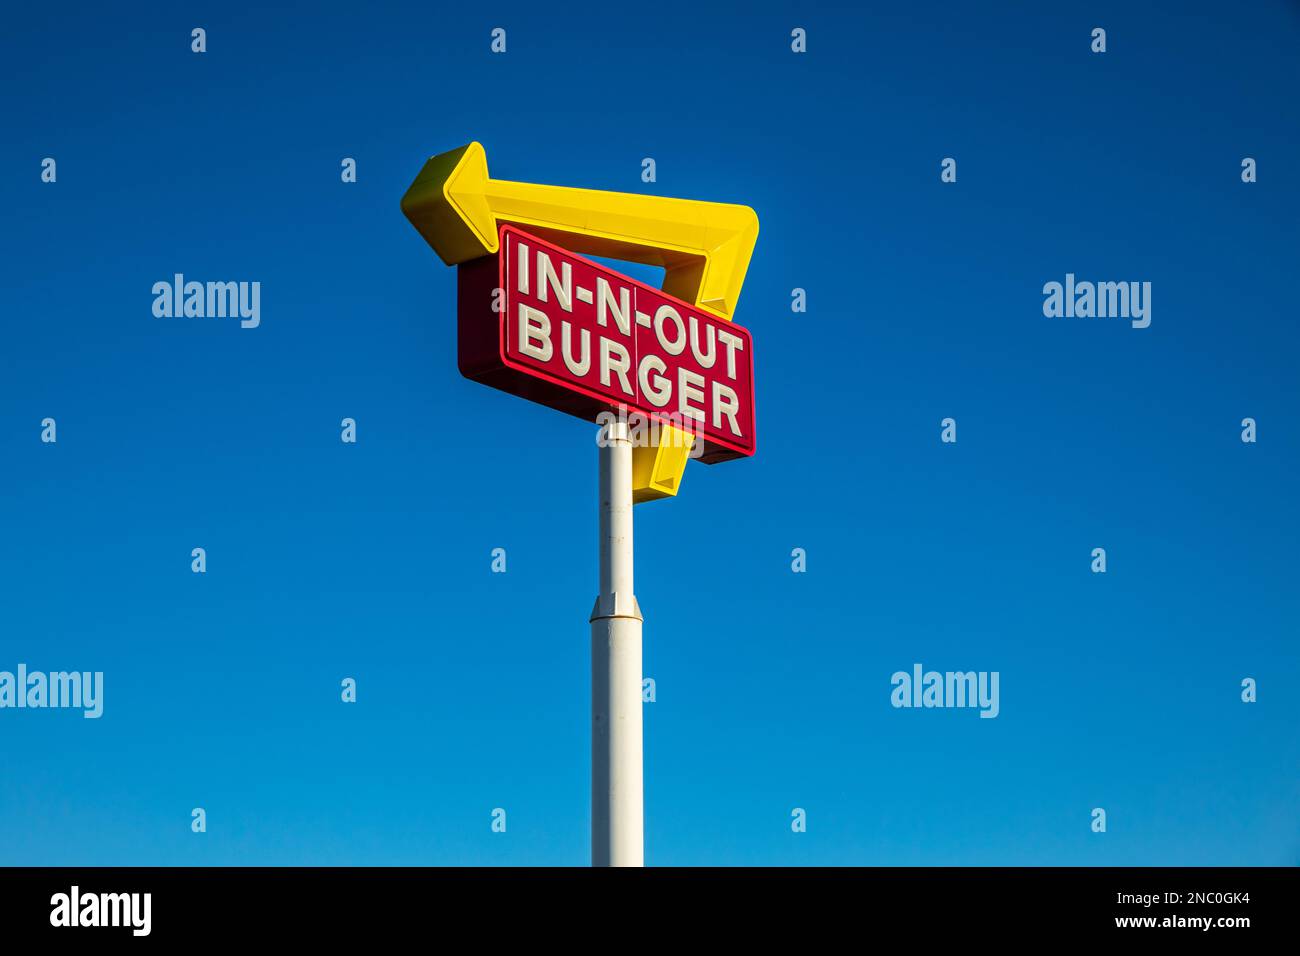 The In-n-Out burger restaurant in Santa Nella California a Truck stop on Interstate 5 in Merced County Stock Photo